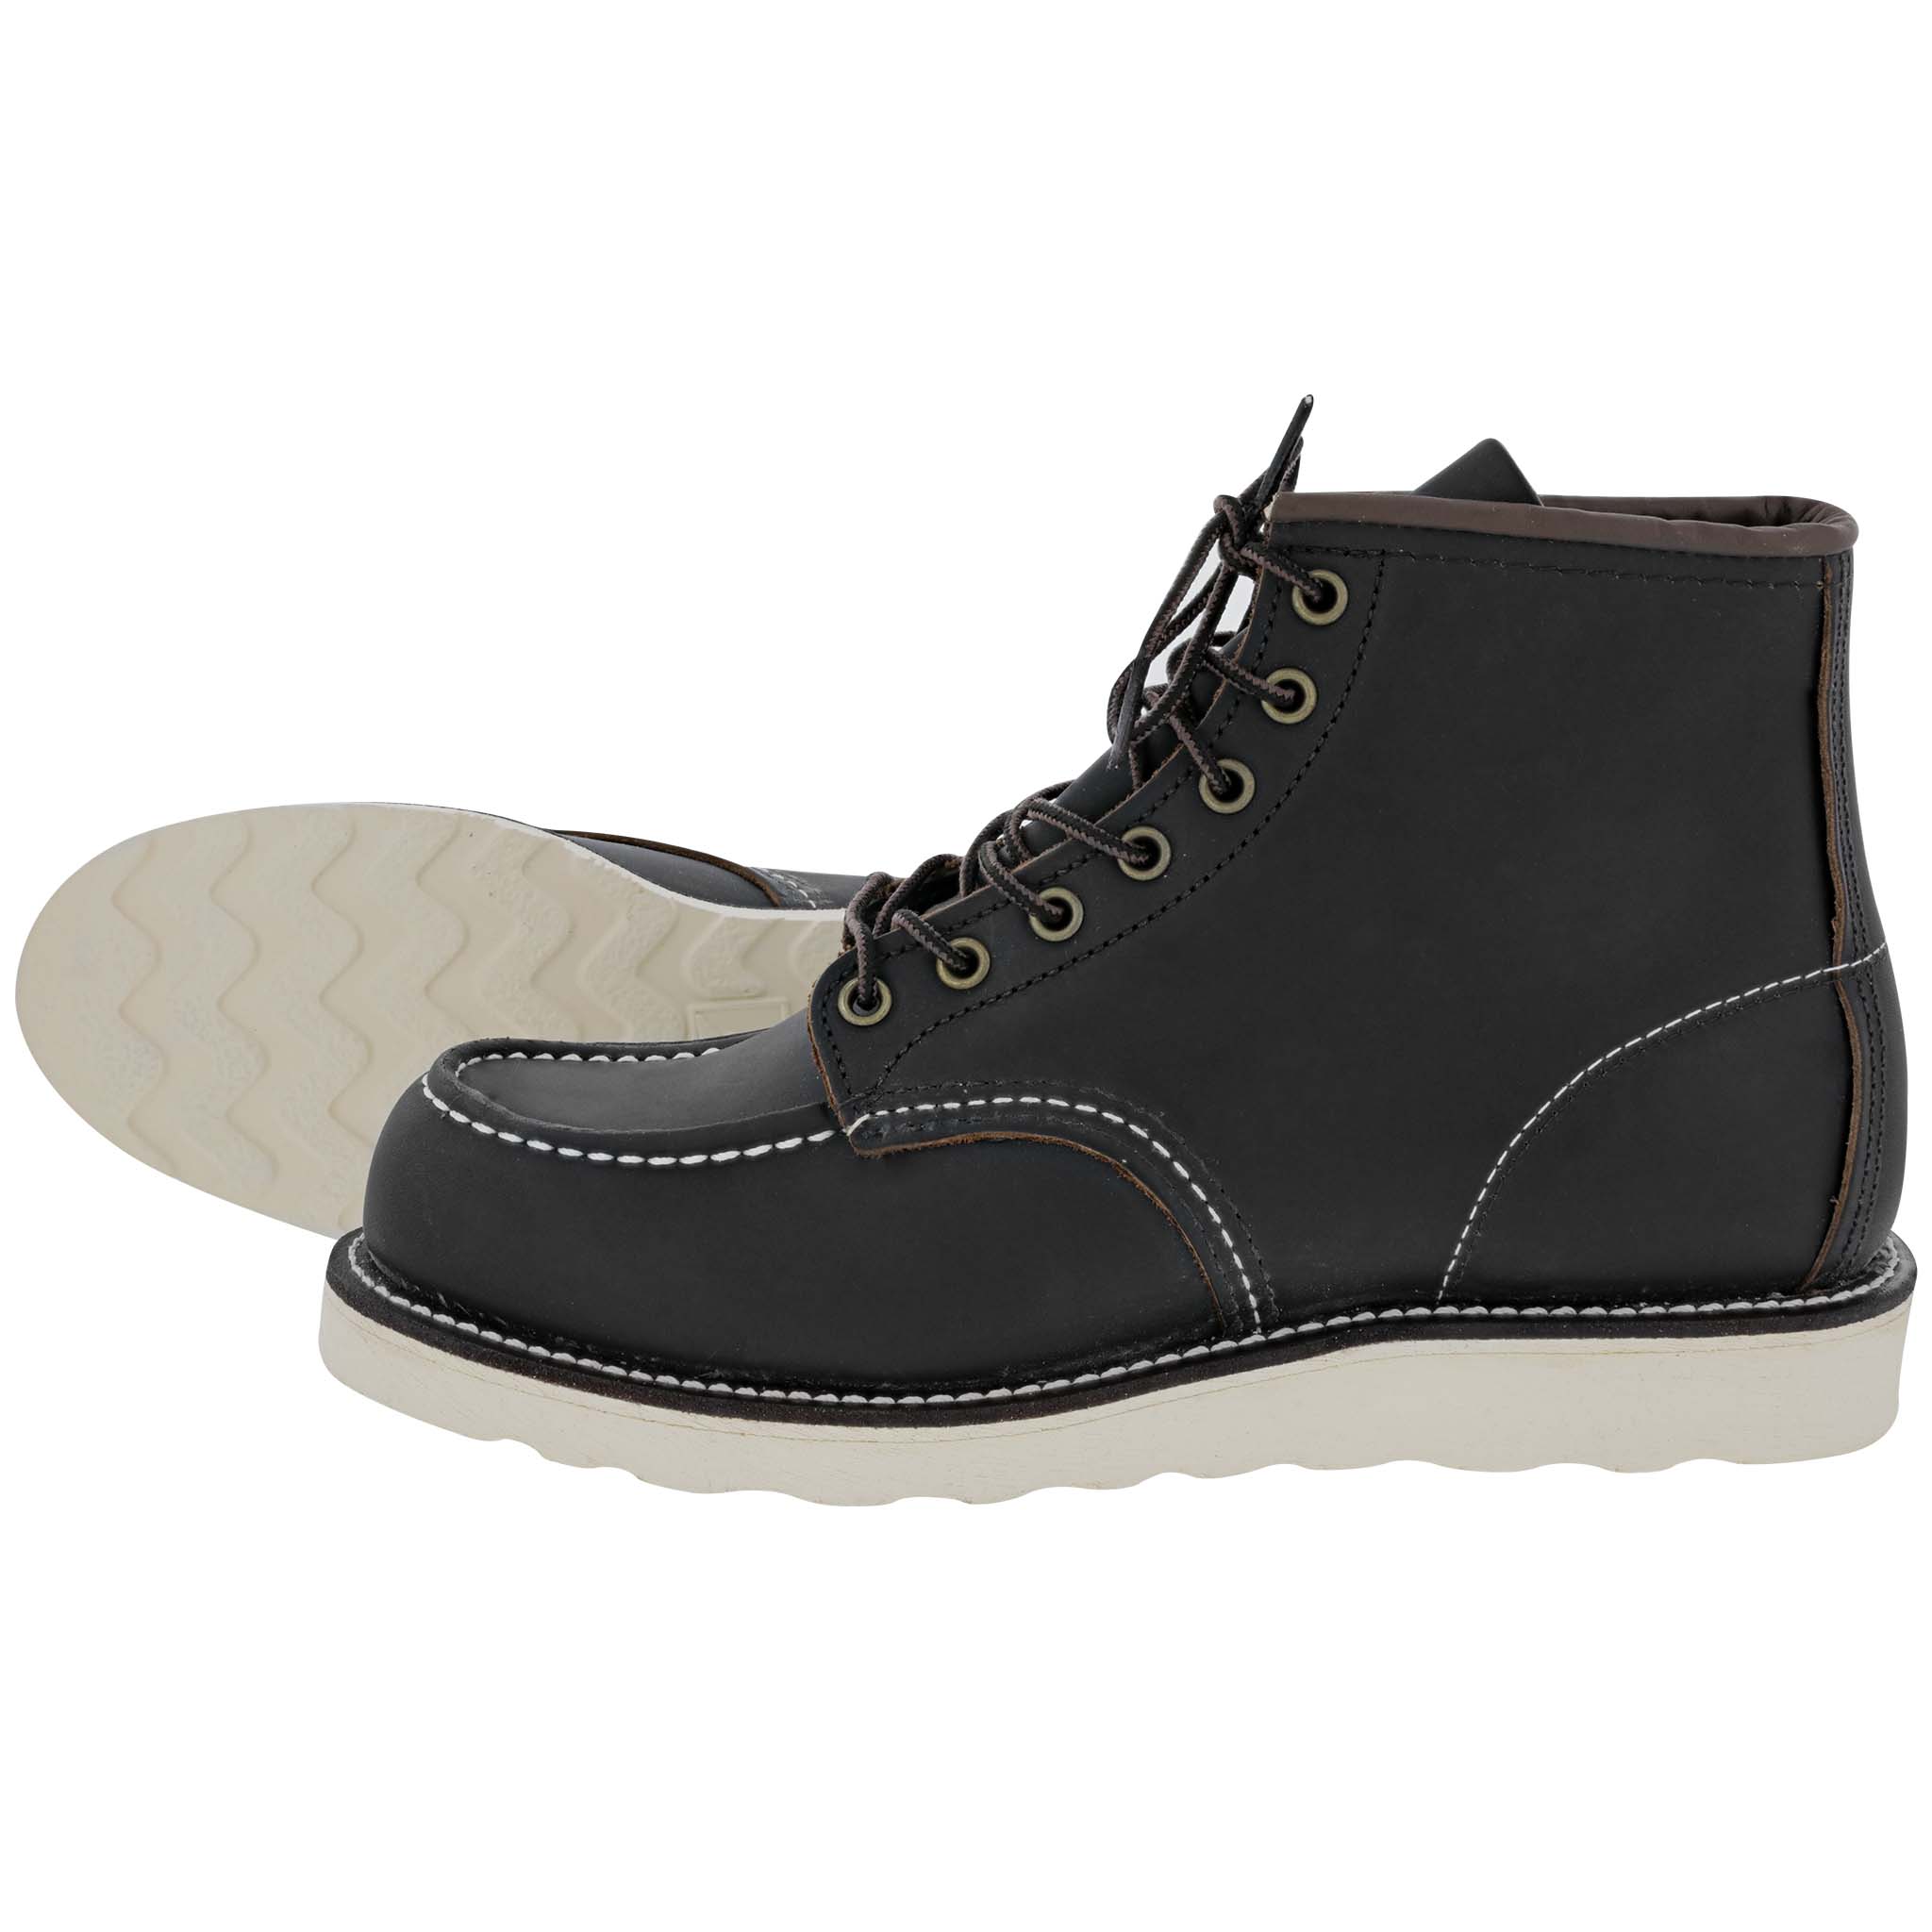 Red Wing Shoes - Suprise early BLACK FRIDAY SALE!! Today and